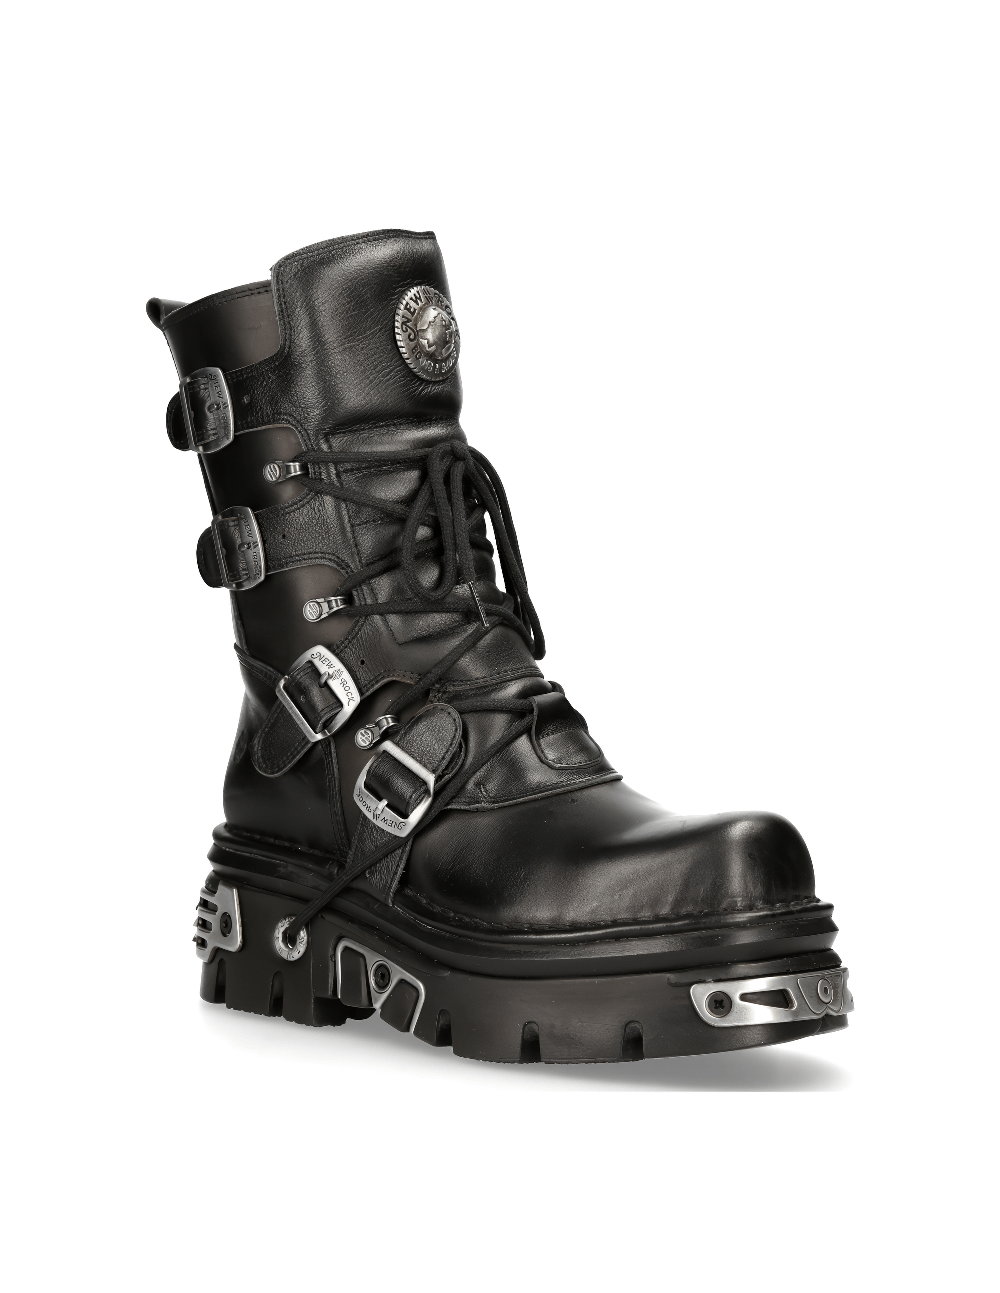 NEW ROCK Gothic Rocker Buckled Lace-Up Black Boots